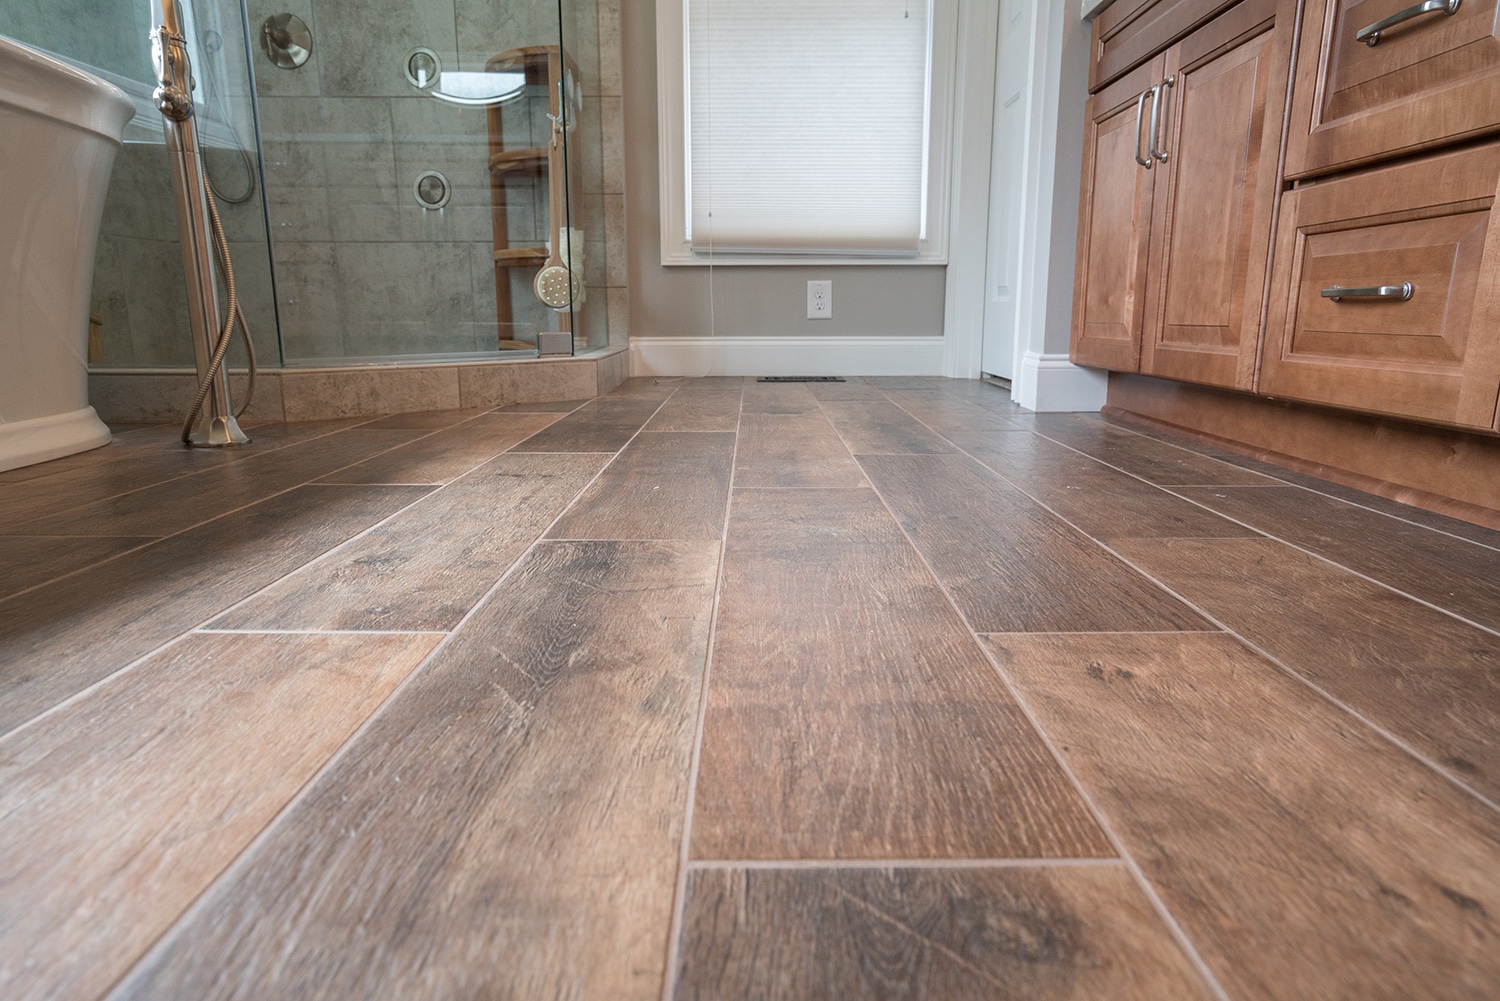 Pros And Cons Of Tile Flooring Tracy, Ceramic Tile That Looks Like Wood Pros And Cons